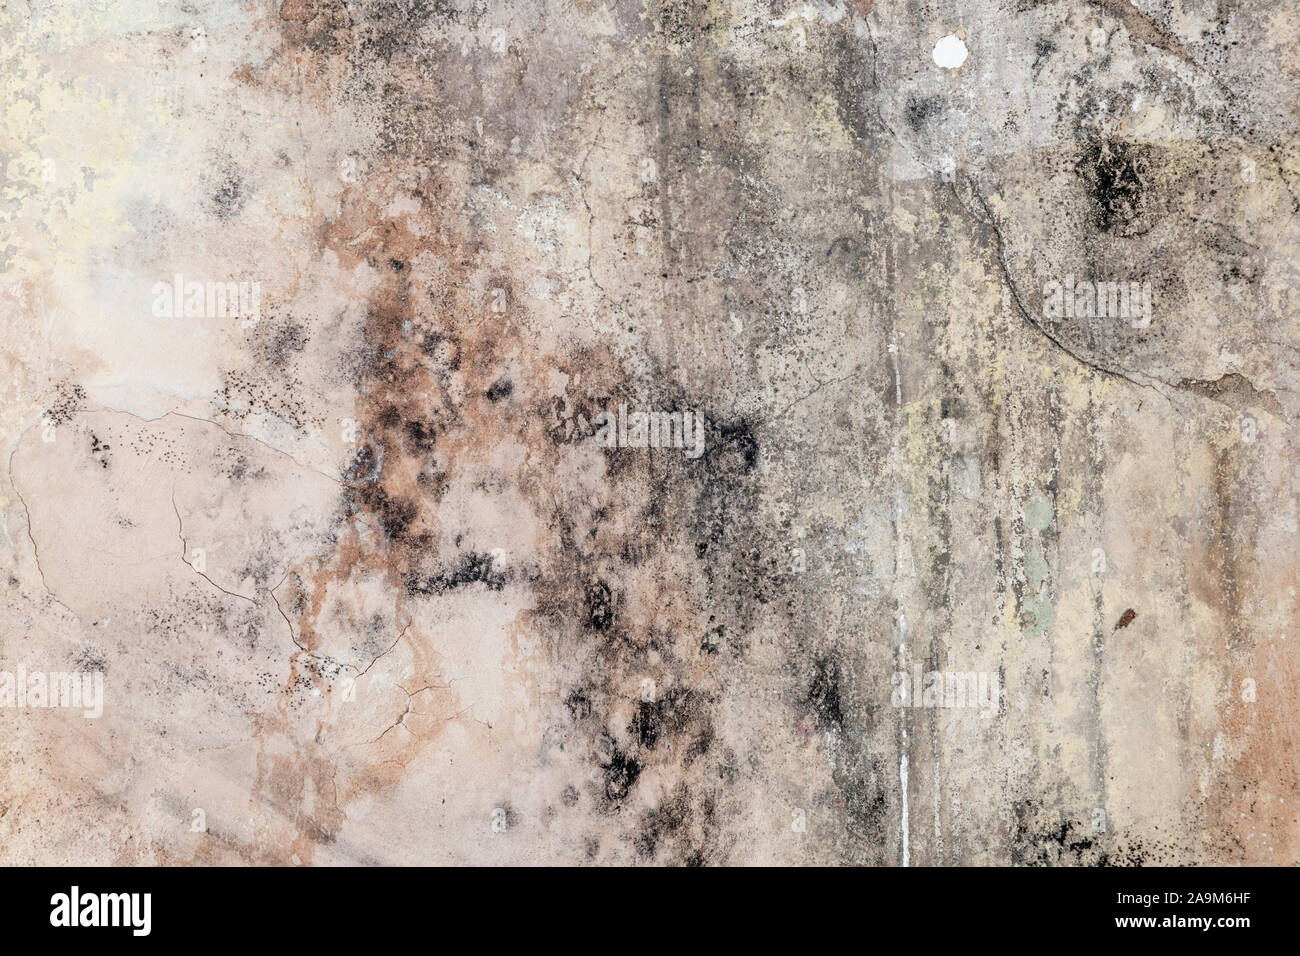 Damp wall. Interior wall of a house with old plaster and mould growing on it, England, UK Stock Photo